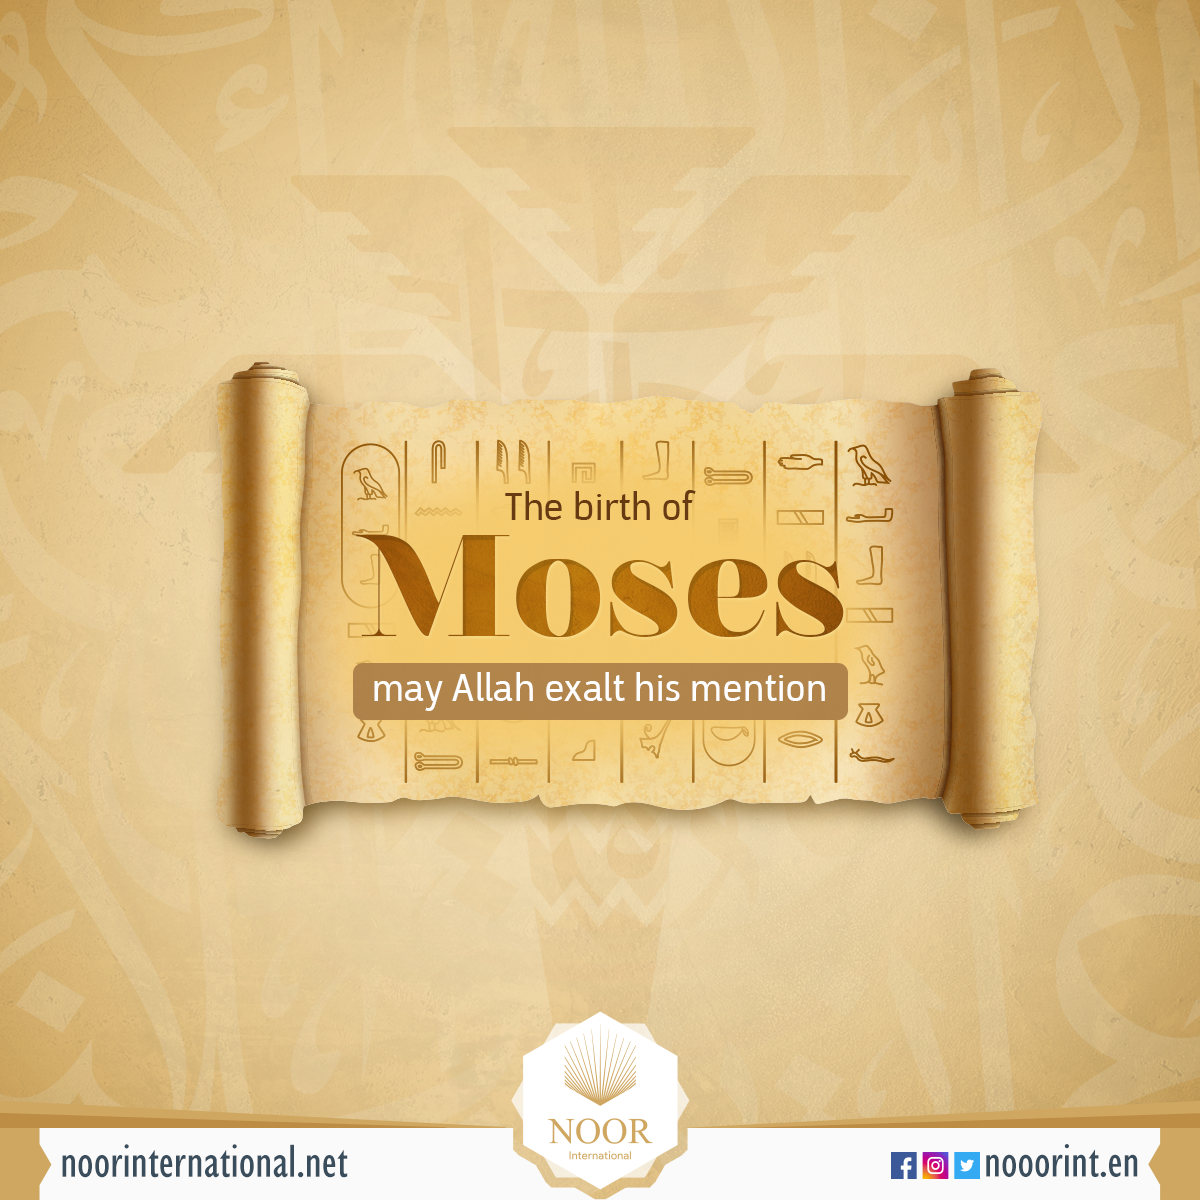 The birth of Moses may Allah exalt his mention